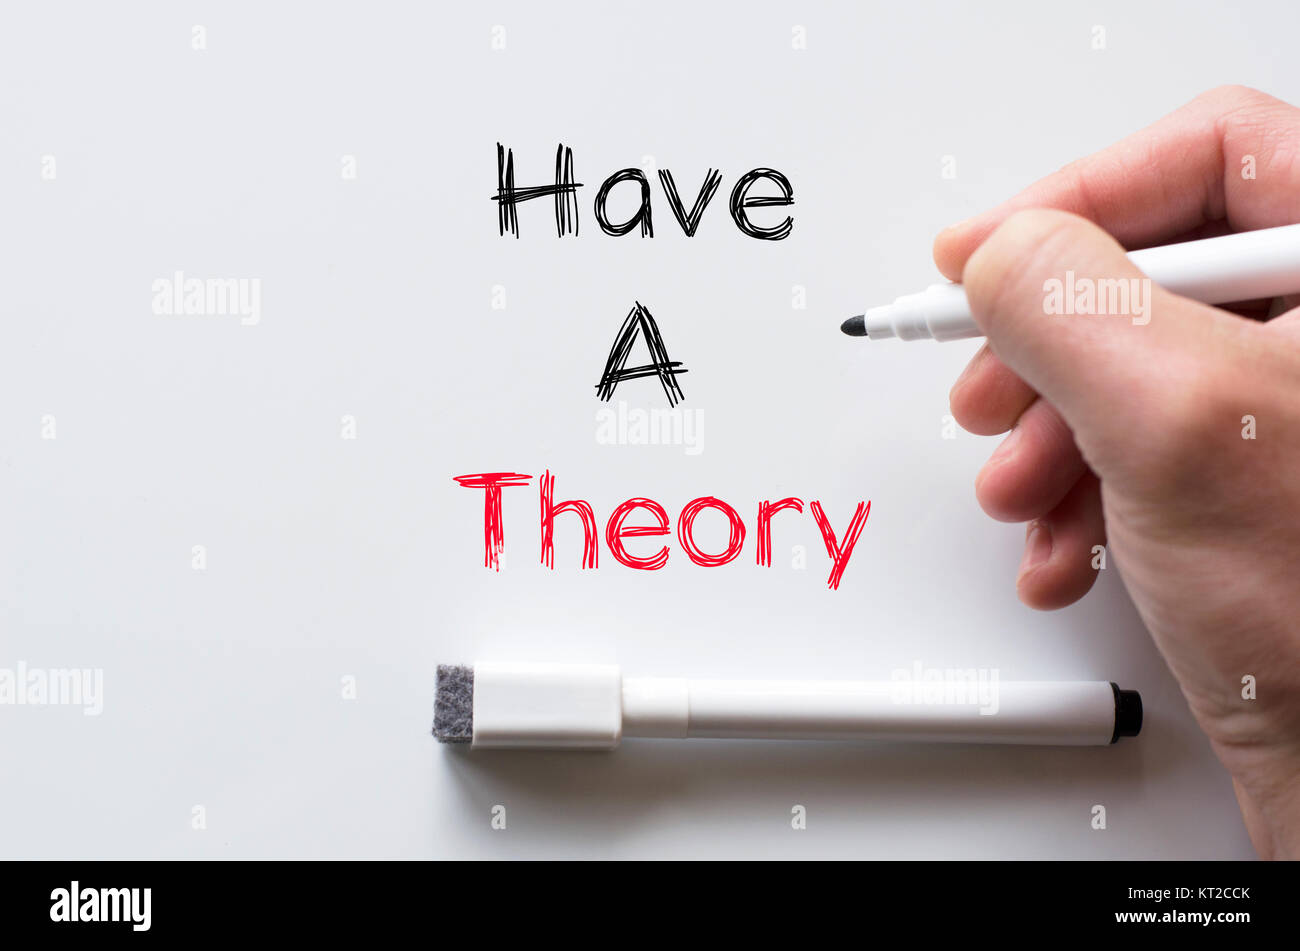 Have a theory written on whiteboard Stock Photo